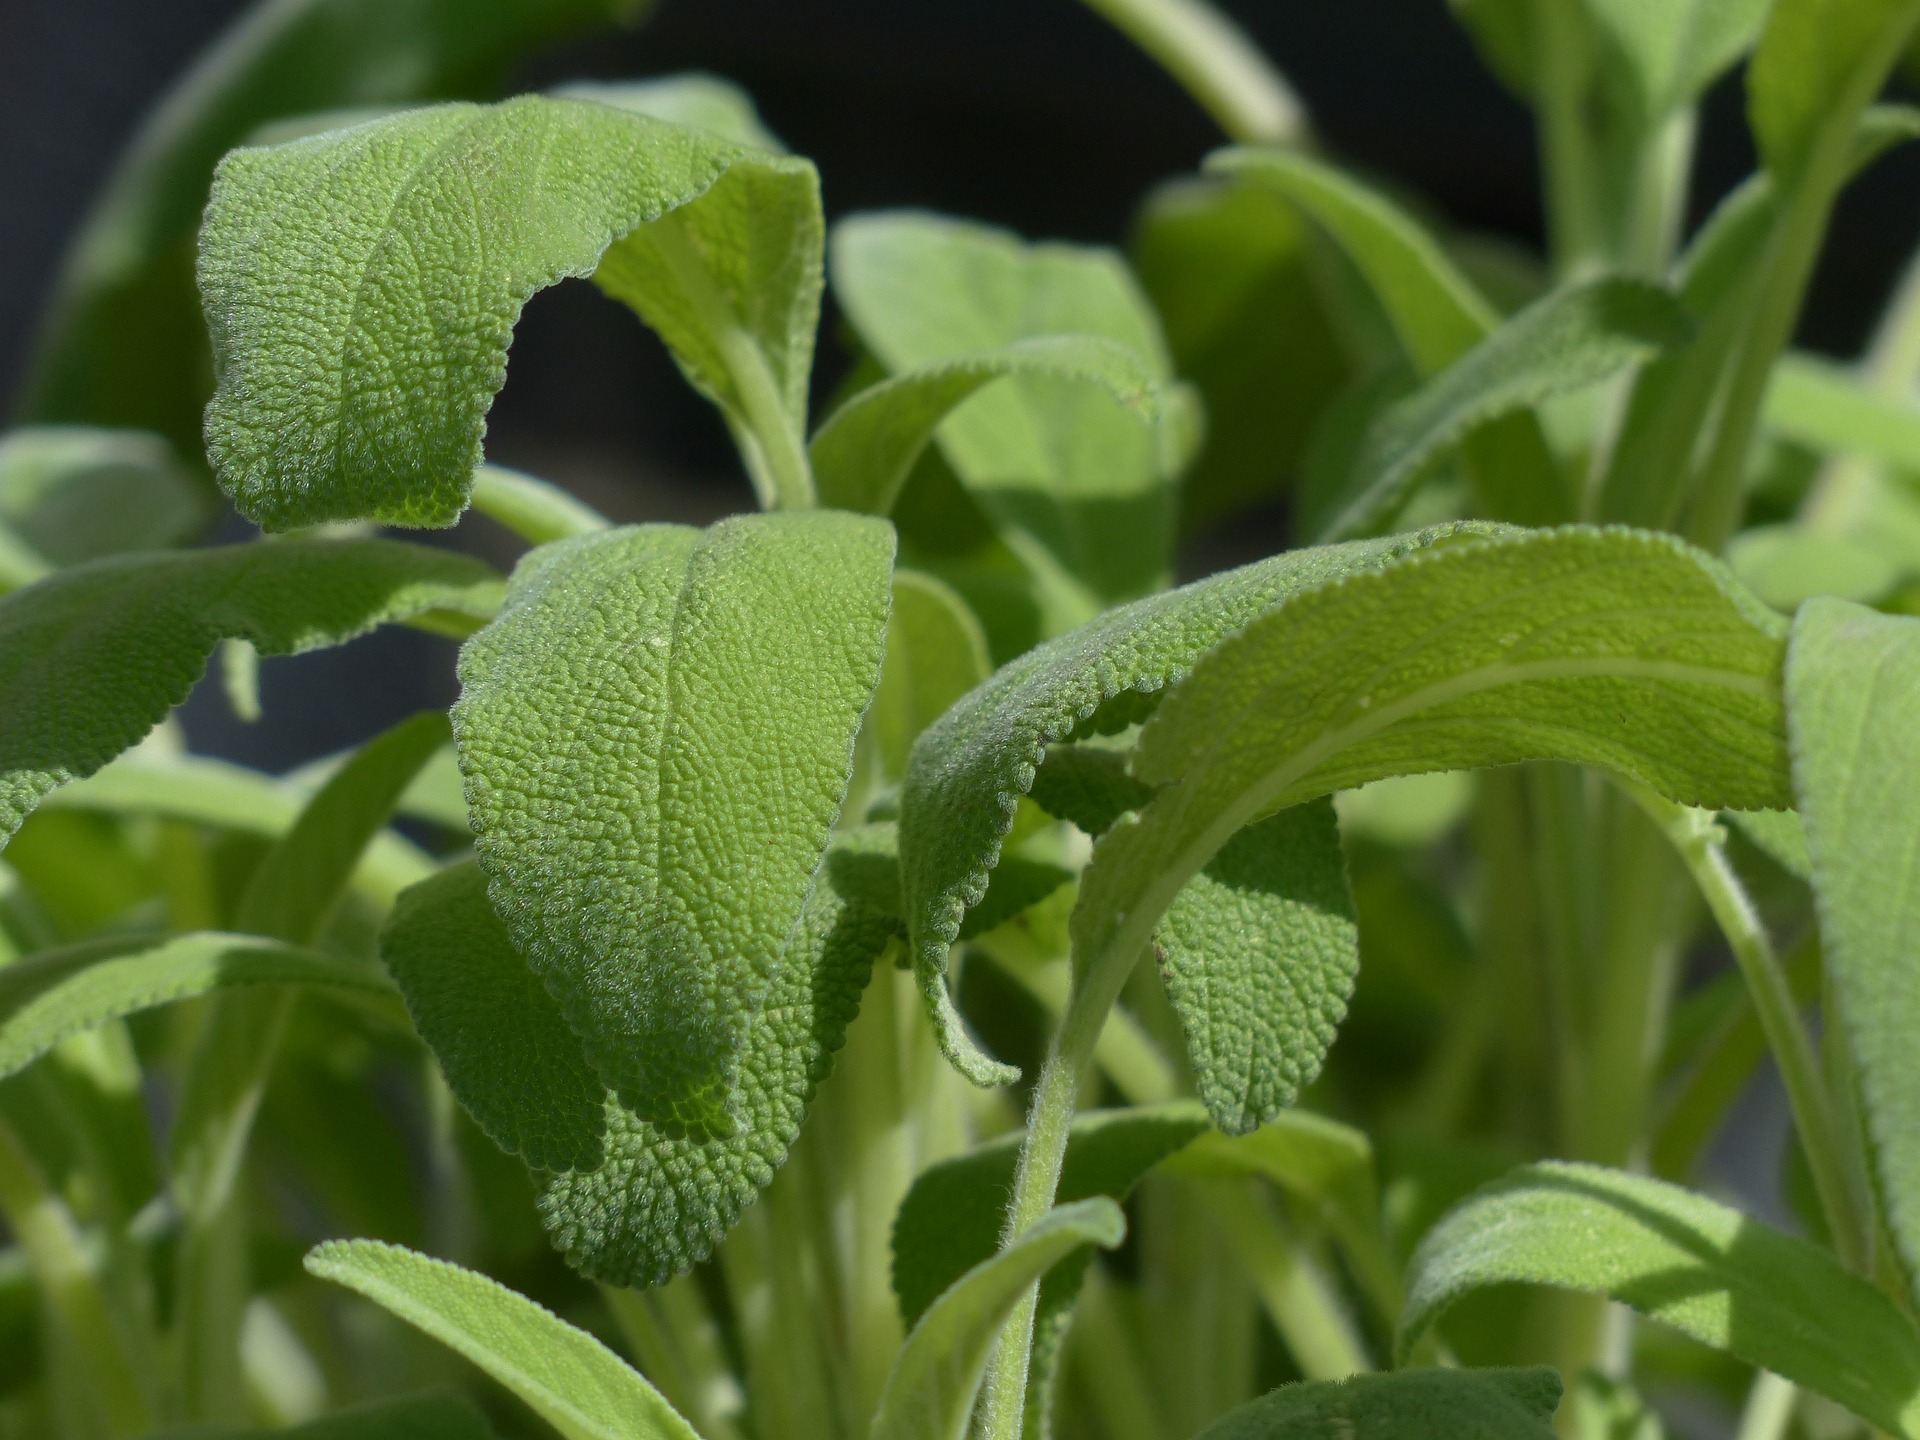 which herbs are invasive: Sage